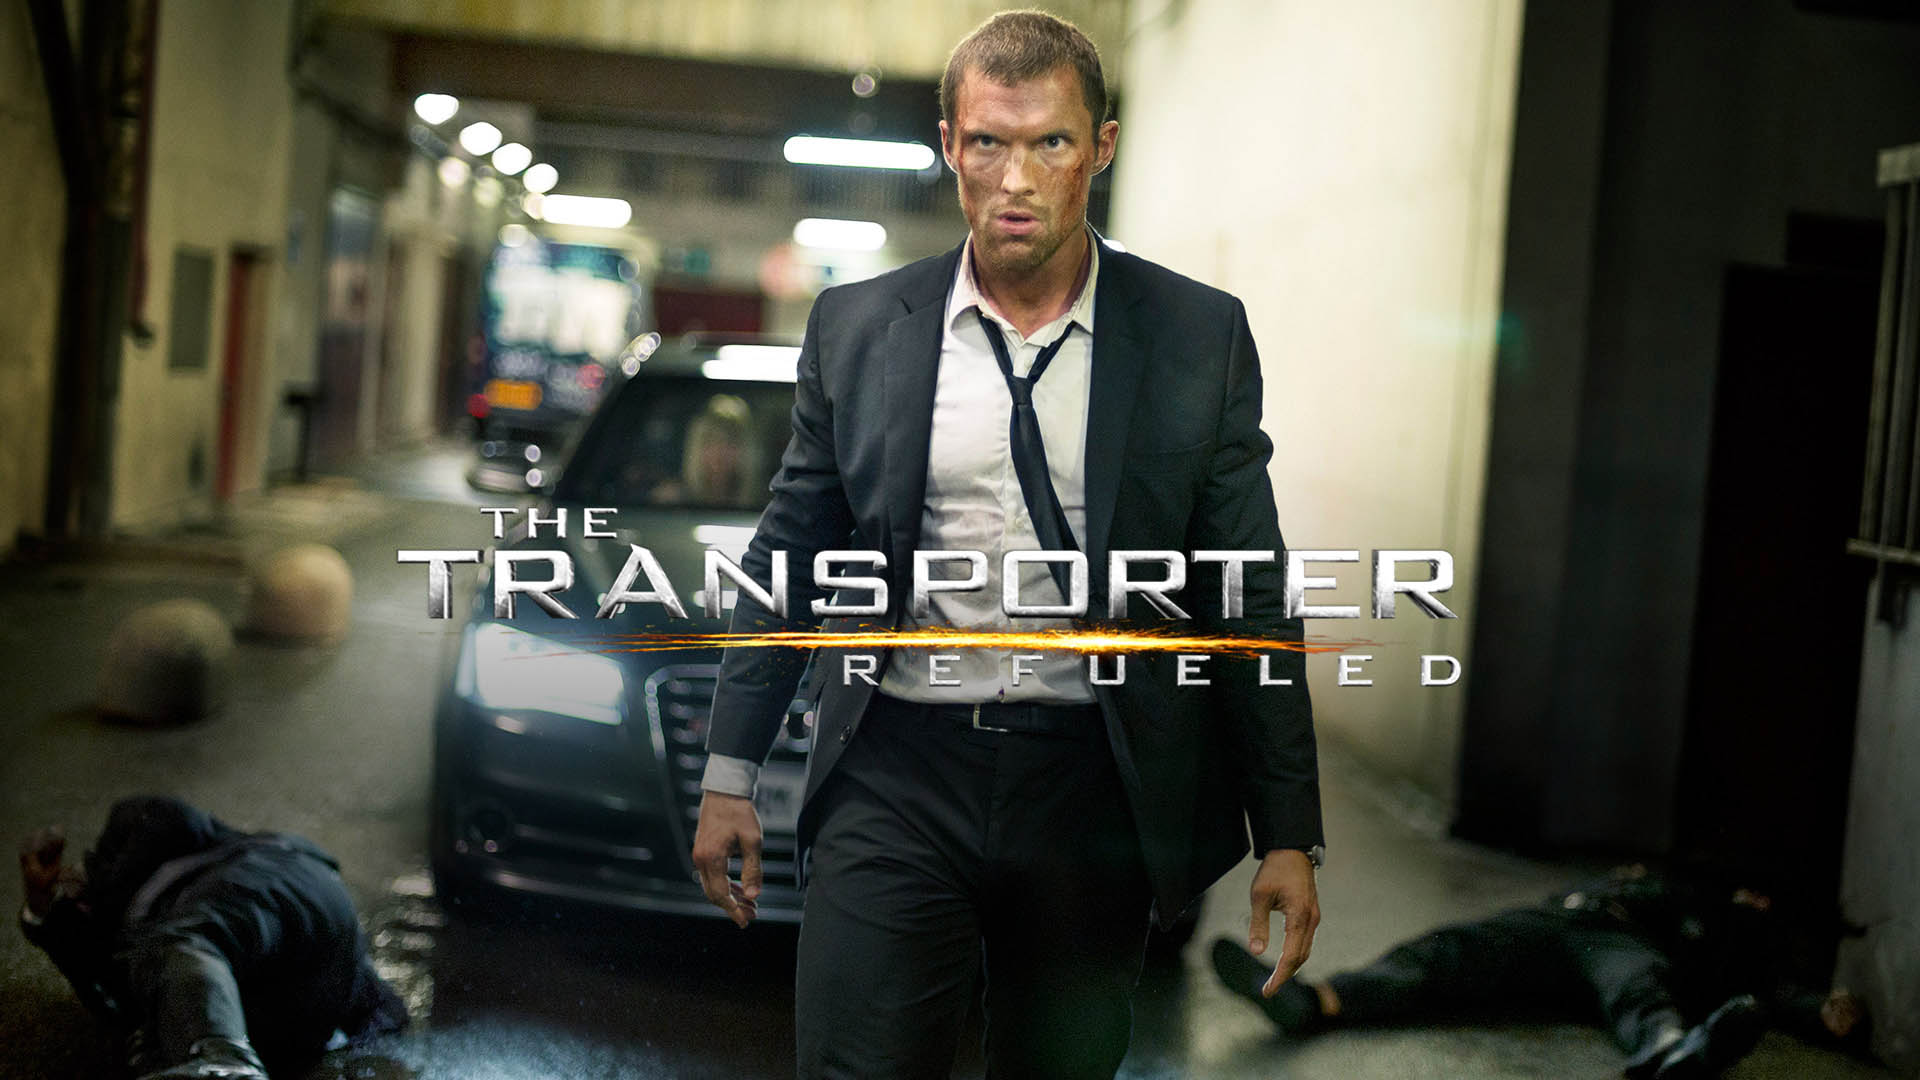 Watch The Transporter Refueled Online | Stream Full Movies